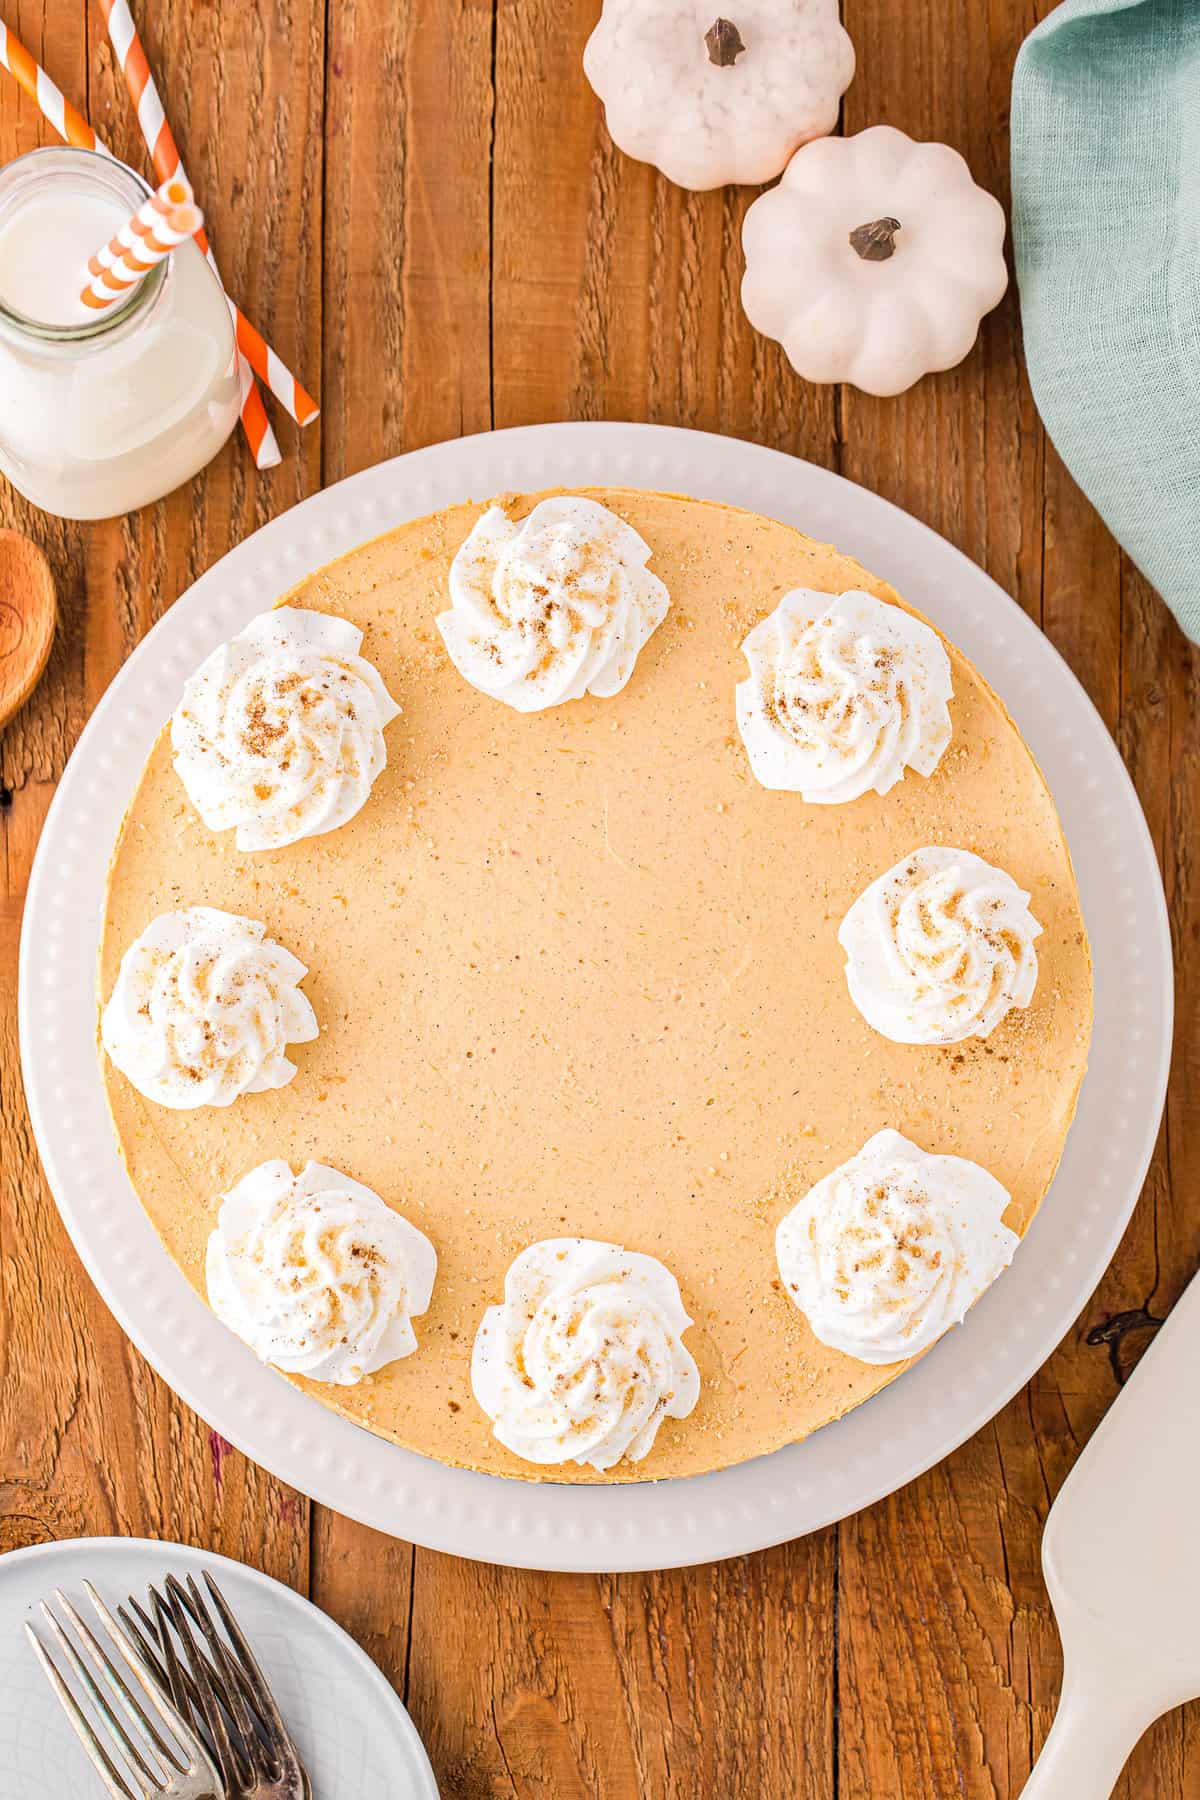 Finished no bake pumpkin cheesecake on plate